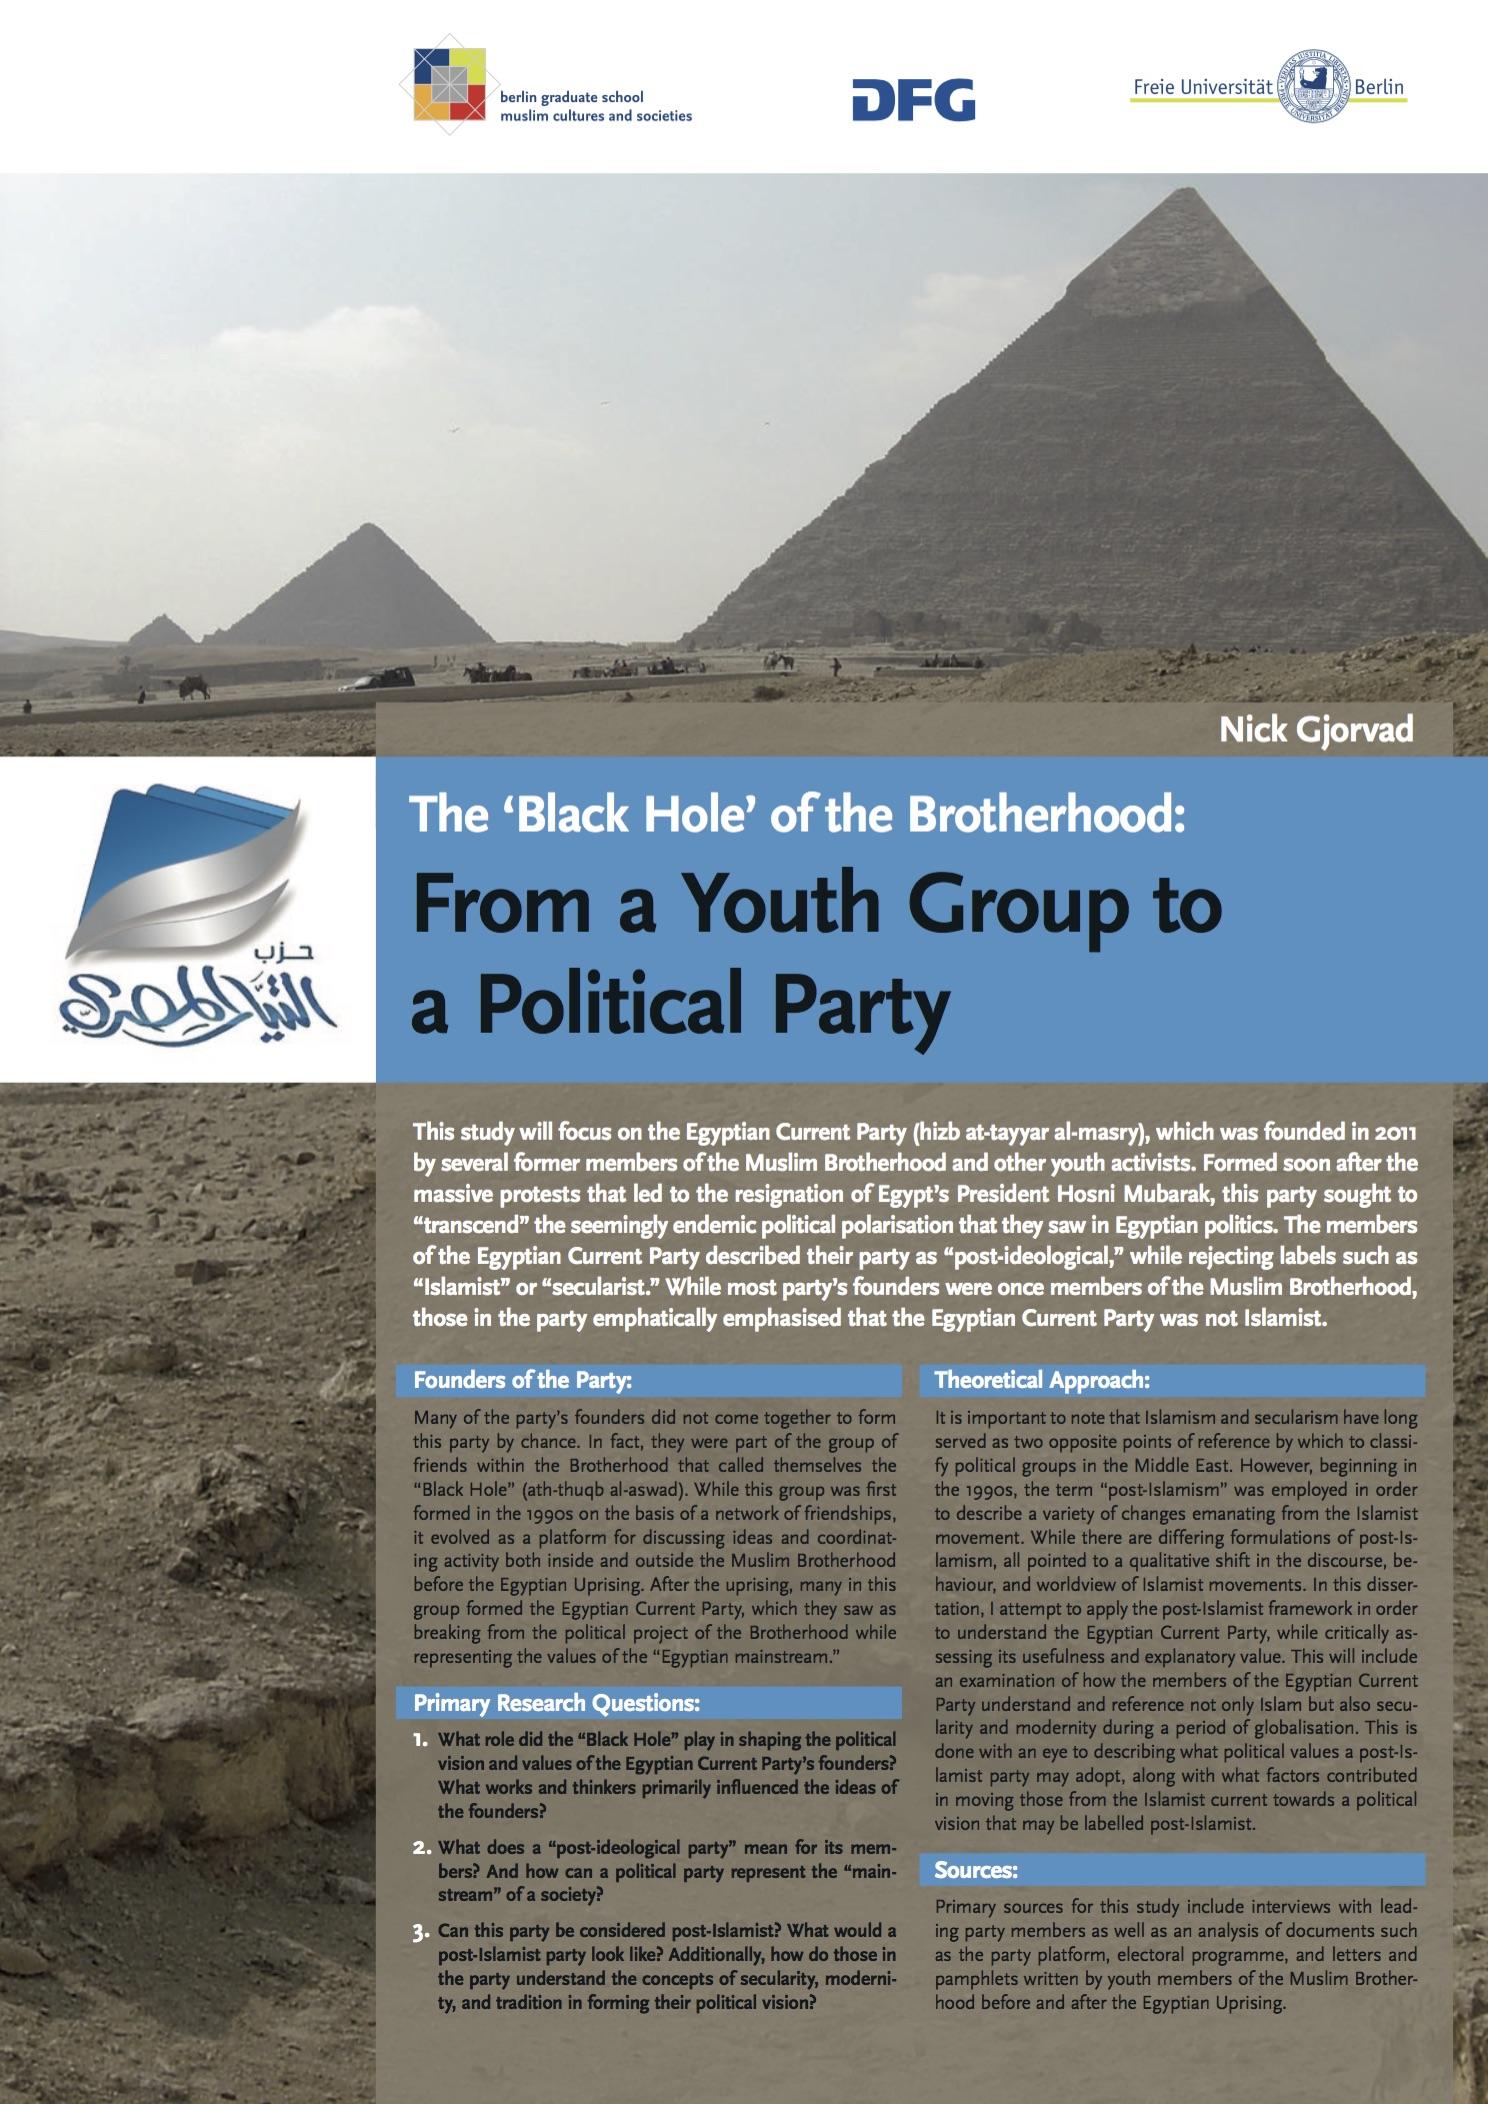 Nicholas Gjorvad: "The 'Black Hole' of the Brotherhood: From a Youth Group to a Political Party"